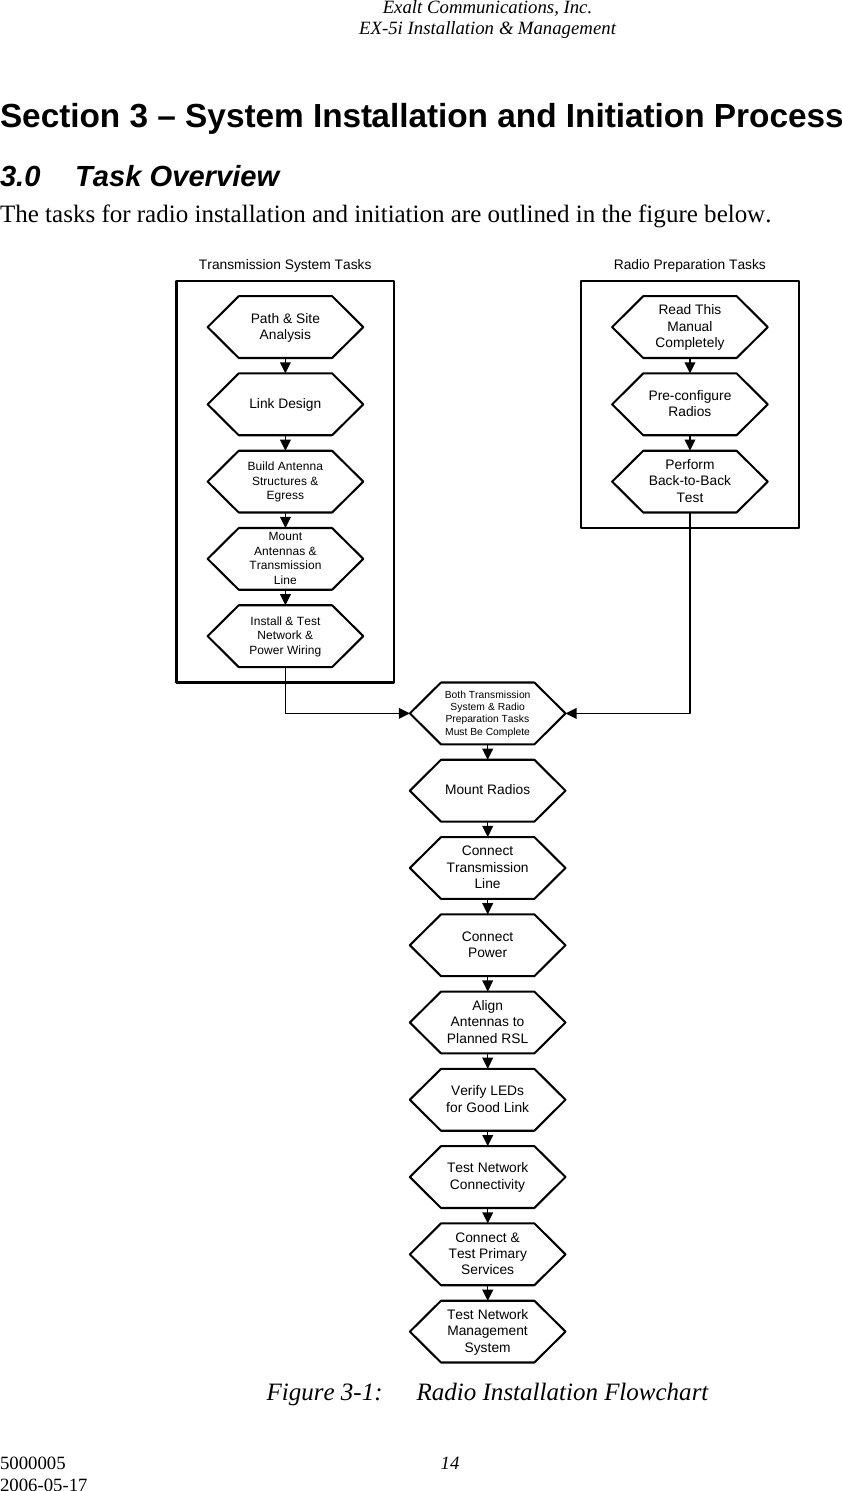 Exalt Communications, Inc. EX-5i Installation &amp; Management 5000005  14 2006-05-17 Section 3 – System Installation and Initiation Process 3.0 Task Overview The tasks for radio installation and initiation are outlined in the figure below.                                         Figure 3-1:  Radio Installation Flowchart Path &amp; Site AnalysisLink DesignBuild Antenna Structures &amp; EgressMount Antennas &amp; Transmission LineInstall &amp; Test Network &amp; Power WiringRead This Manual CompletelyPre-configure RadiosPerform Back-to-Back TestMount RadiosConnect Transmission LineConnect PowerAlign Antennas to Planned RSLVerify LEDs for Good LinkTest Network ConnectivityConnect &amp; Test Primary ServicesTest Network Management SystemBoth Transmission System &amp; Radio Preparation Tasks Must Be CompleteTransmission System Tasks Radio Preparation Tasks